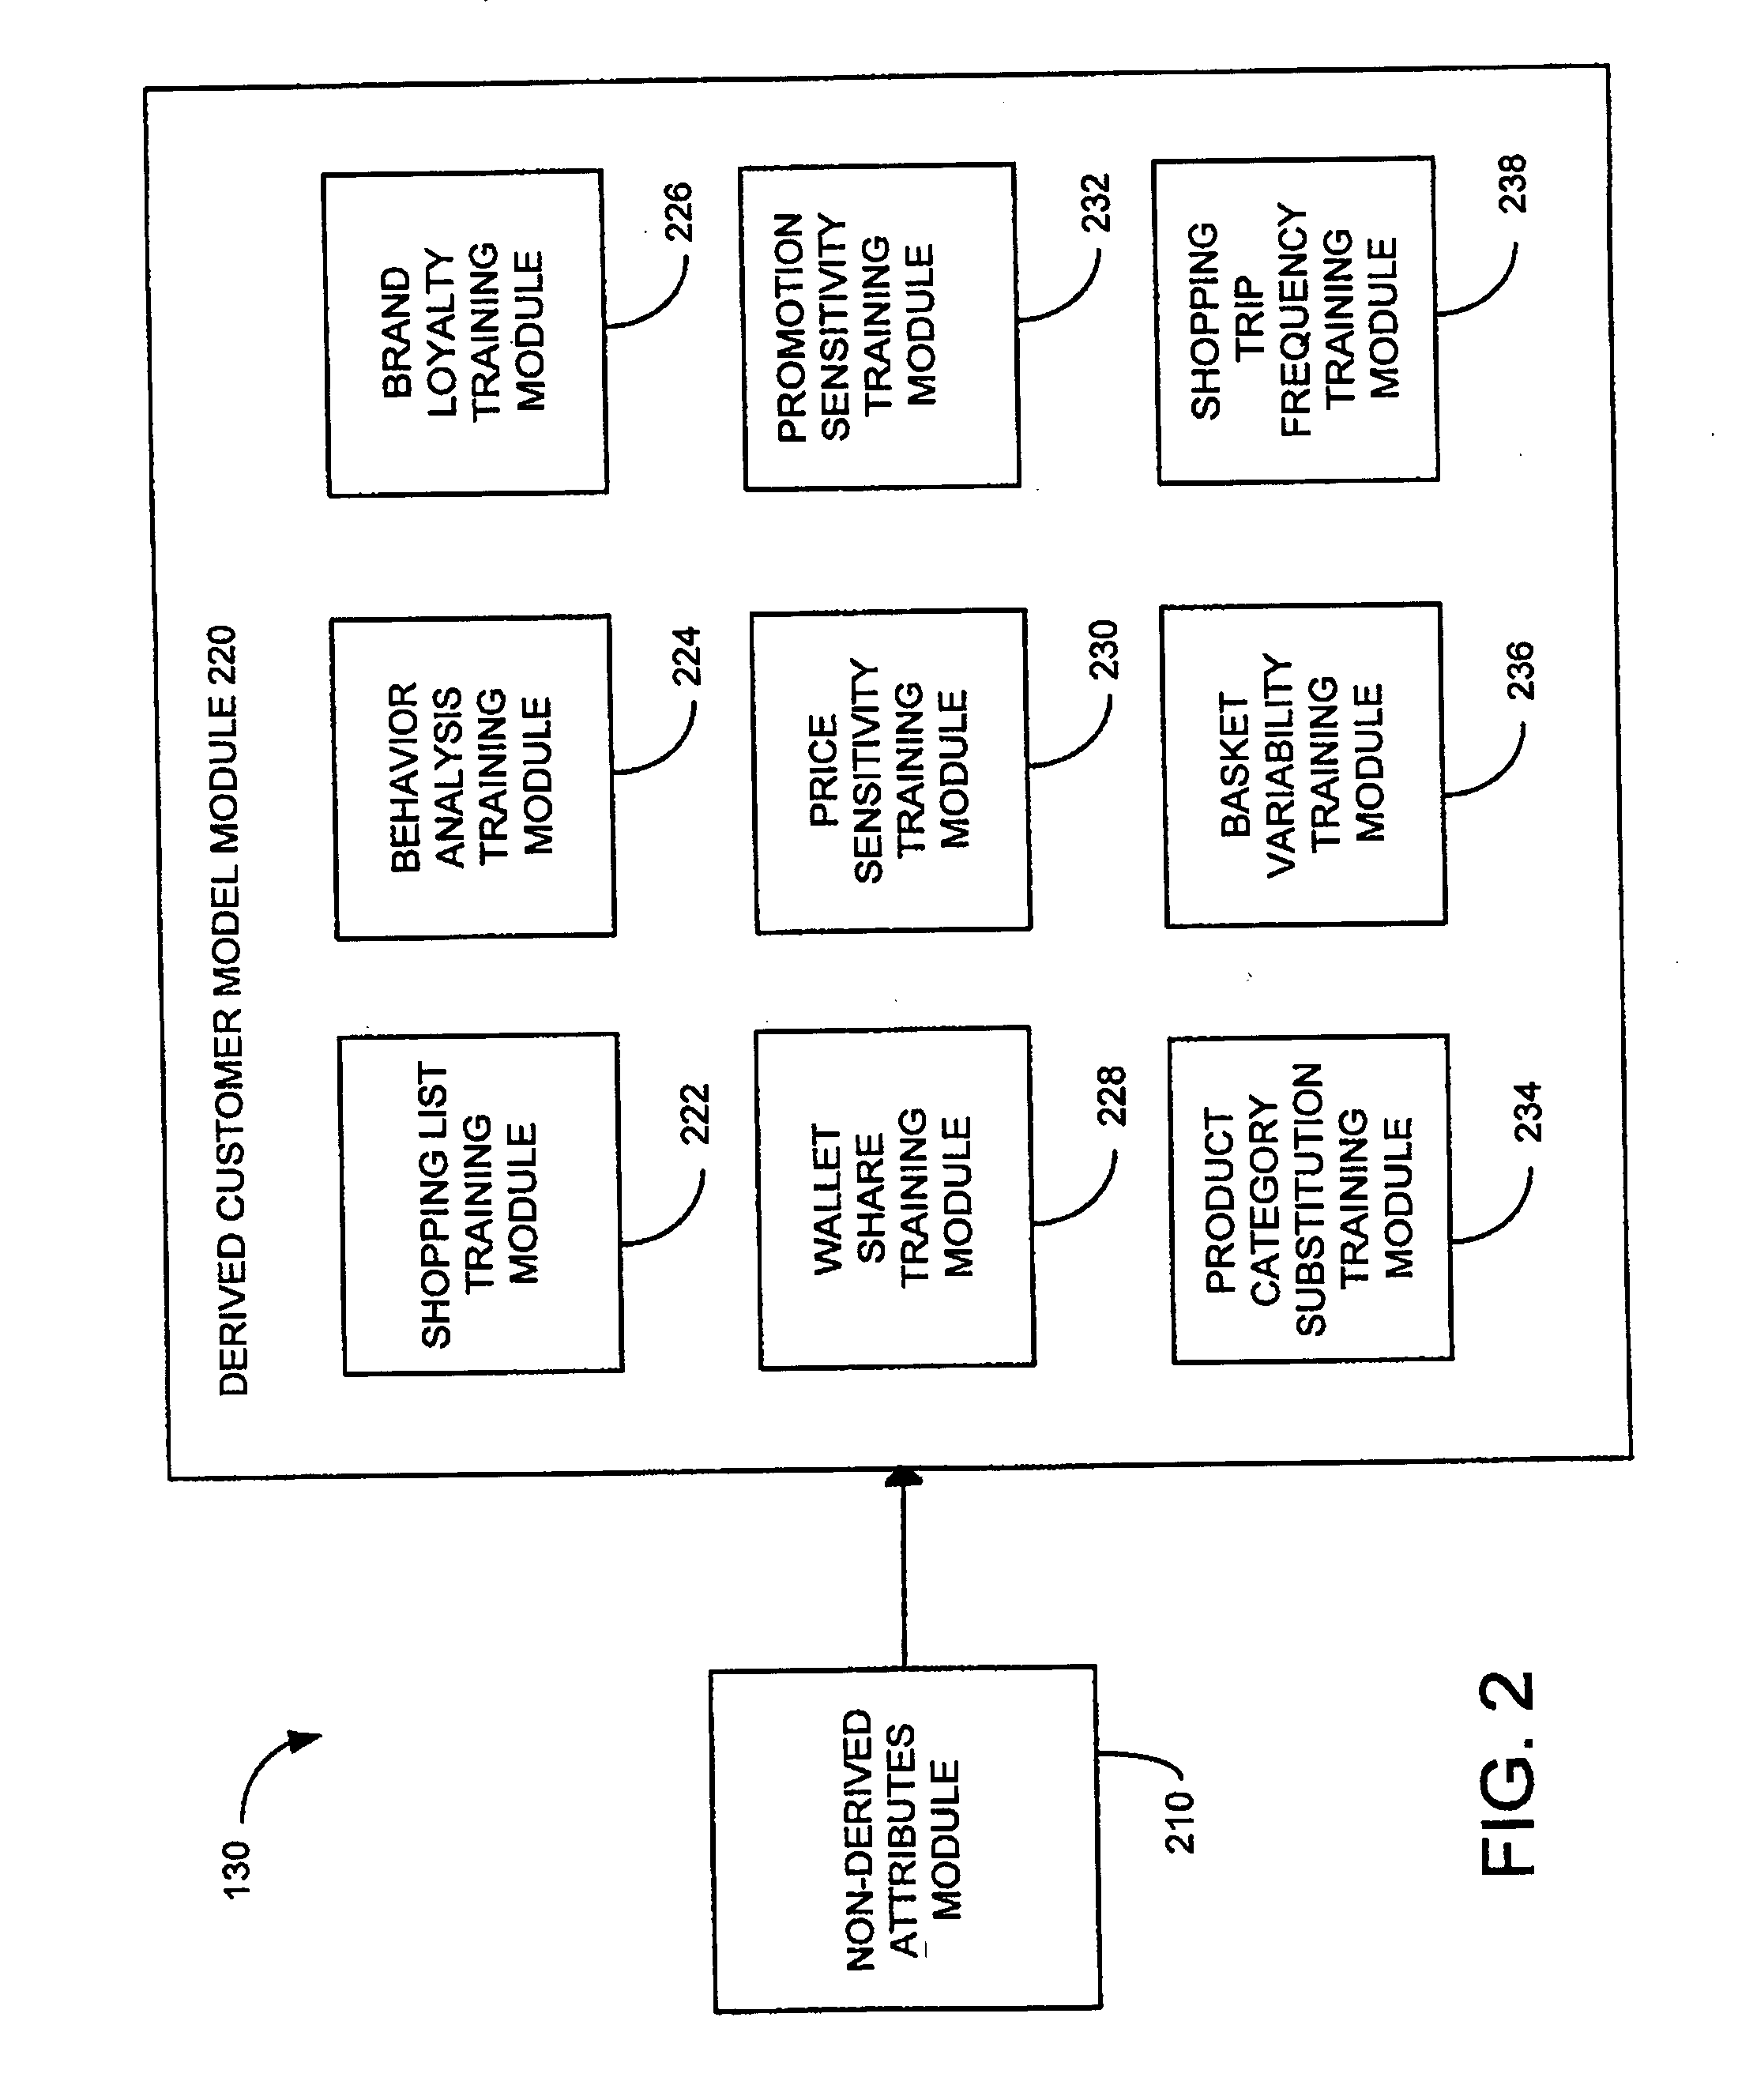 System for individualized customer interaction